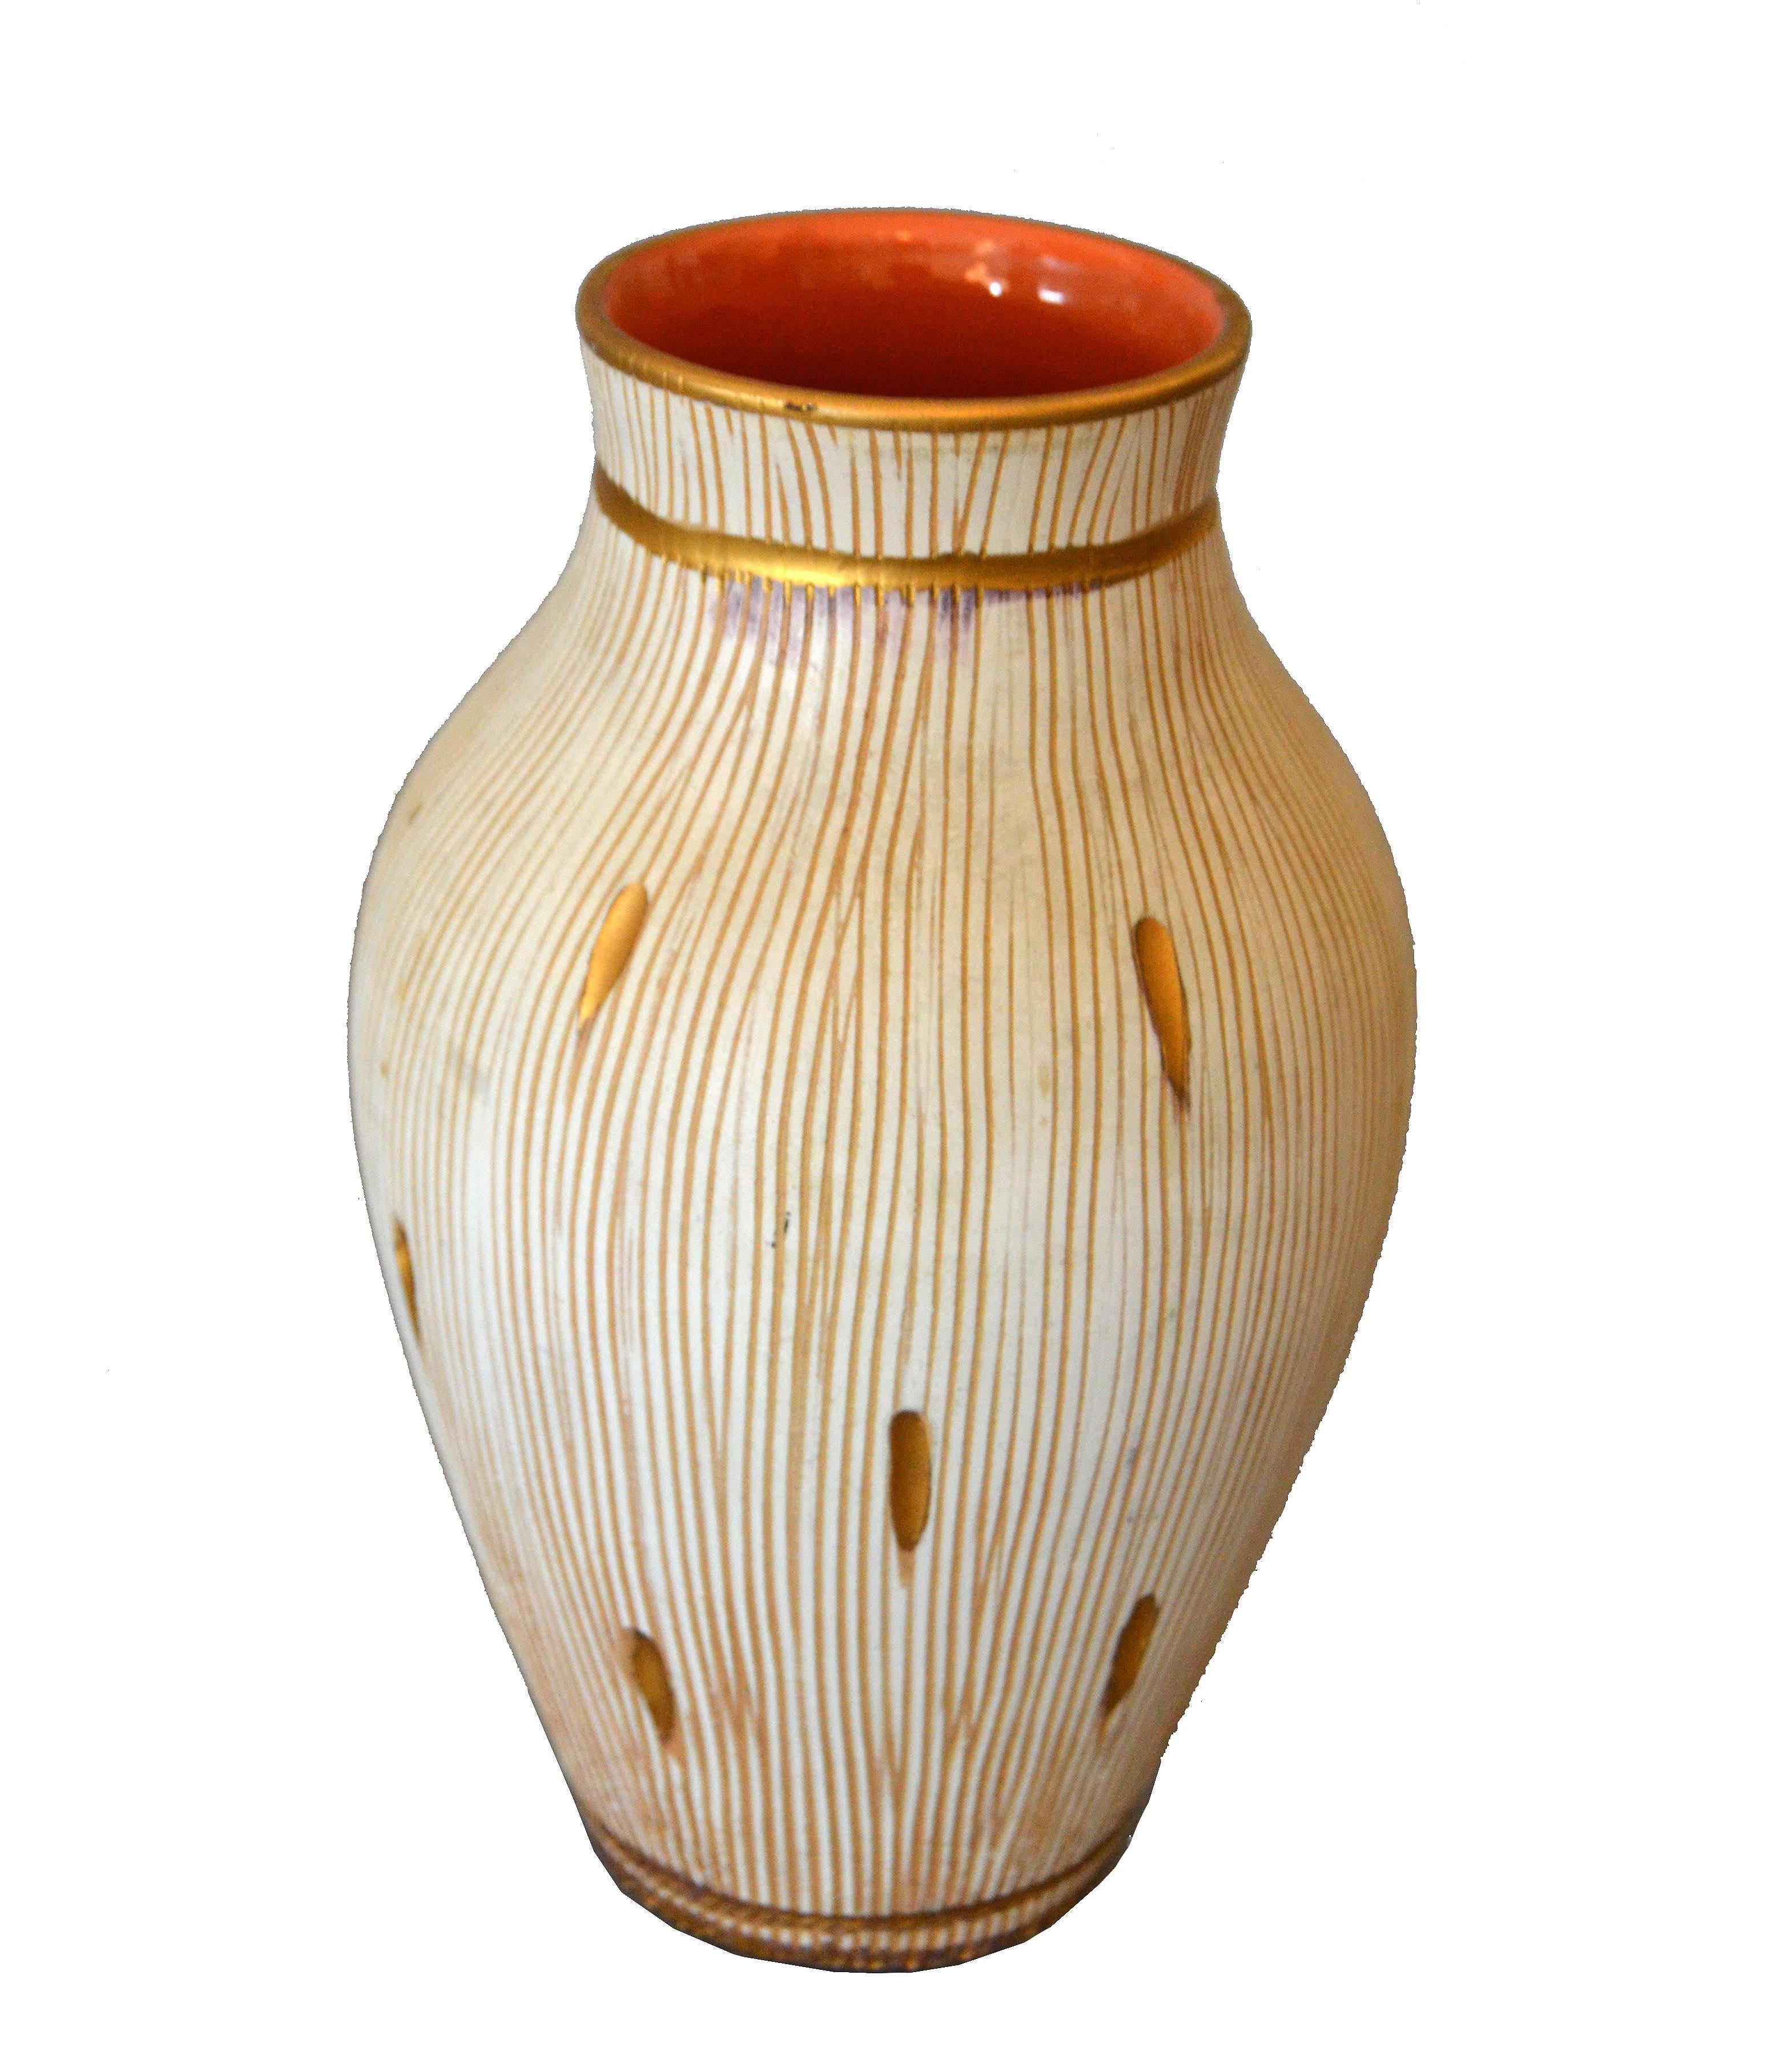 Charming Mid-Century Modern handcrafted ceramic vase in Beige and hand painted with gold leaf.
The inside is glazed in a warm brown tone.
Marked and numbered underneath, Italy, 10-23.